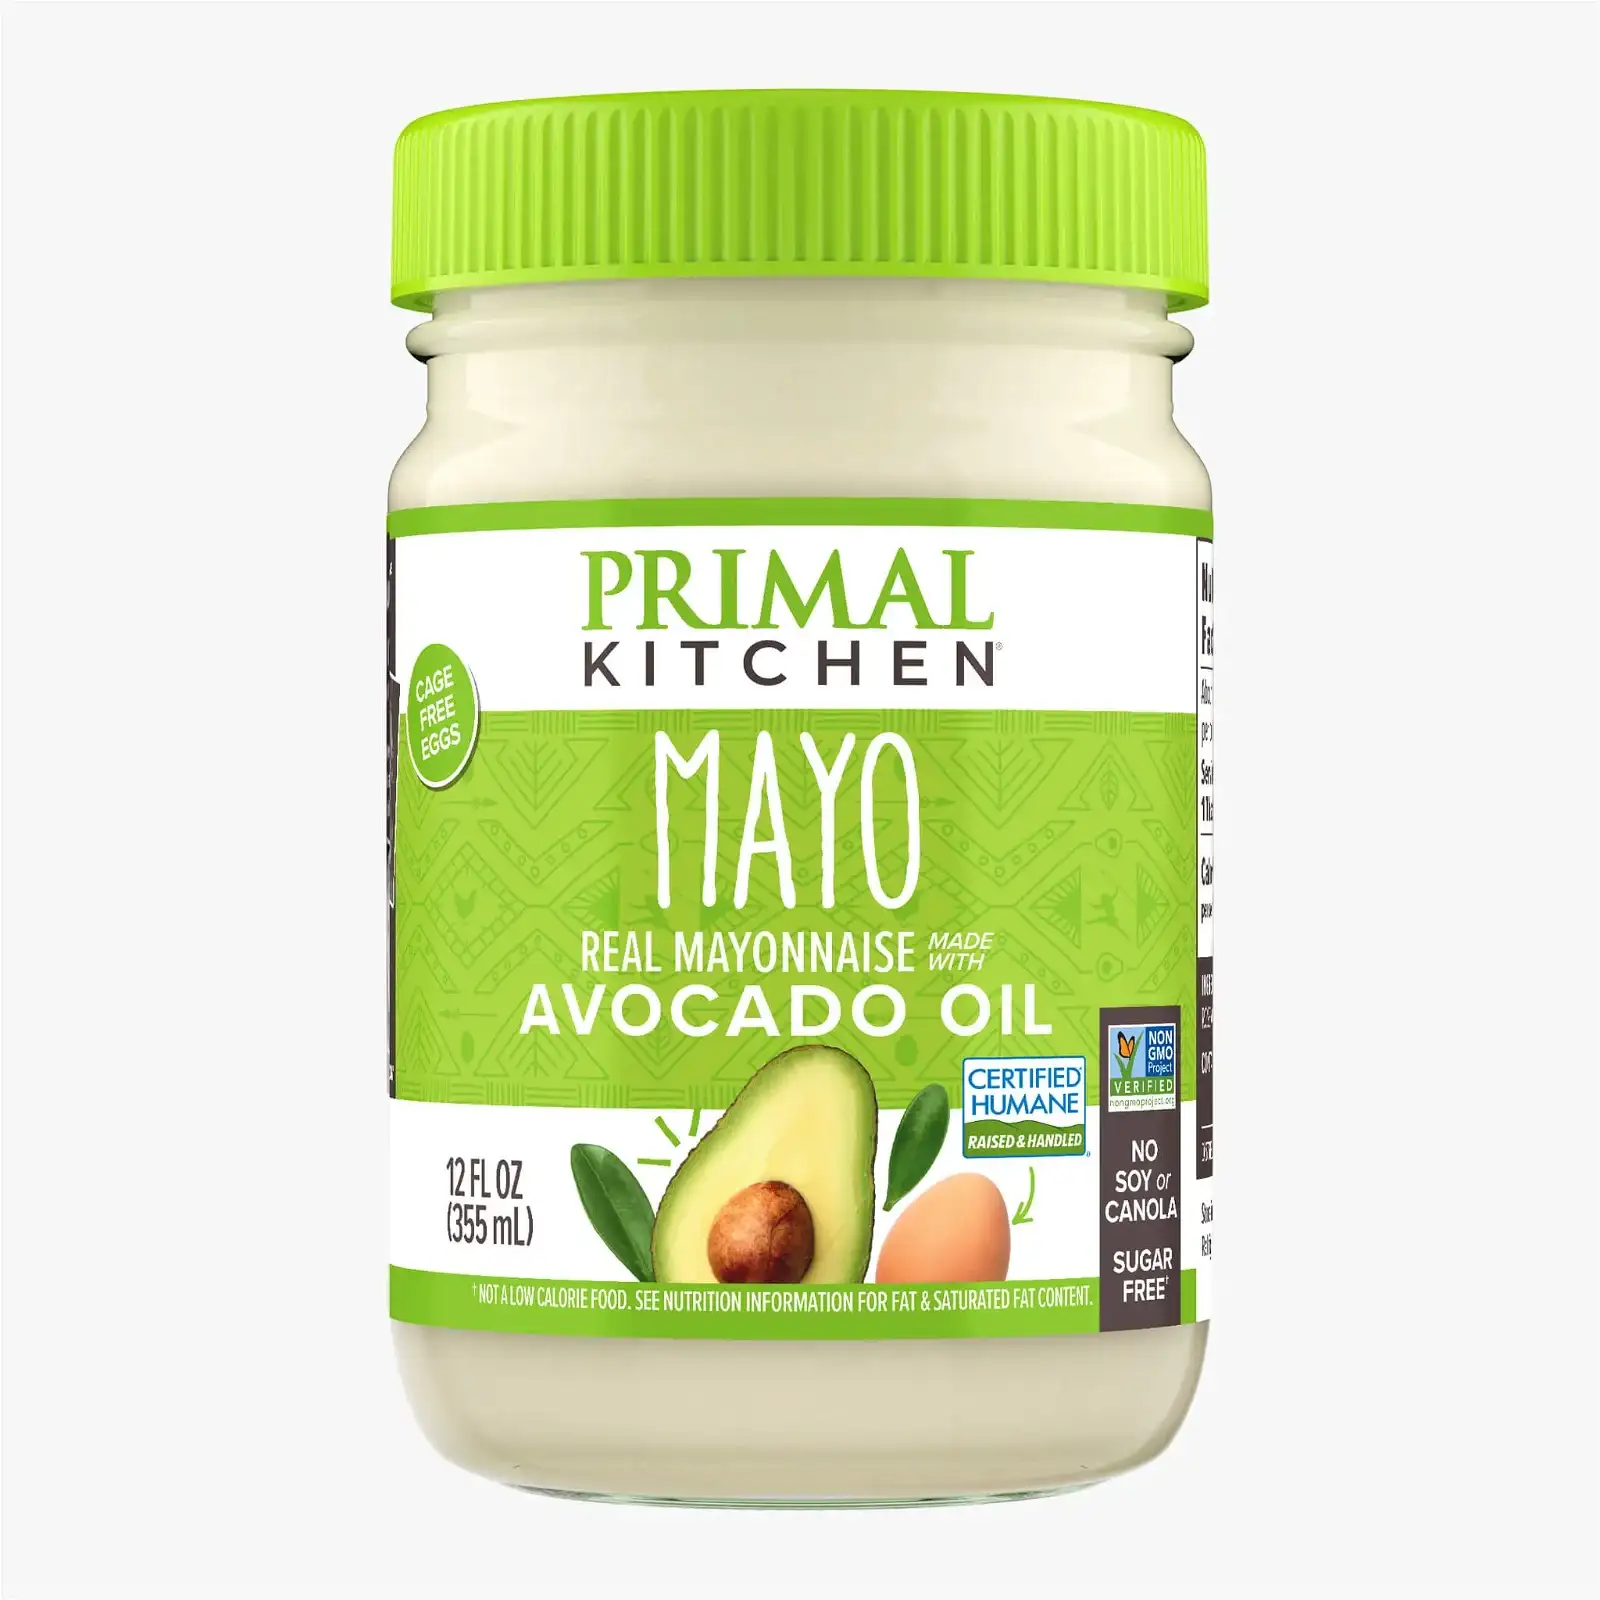 Image of Mayo with Avocado Oil